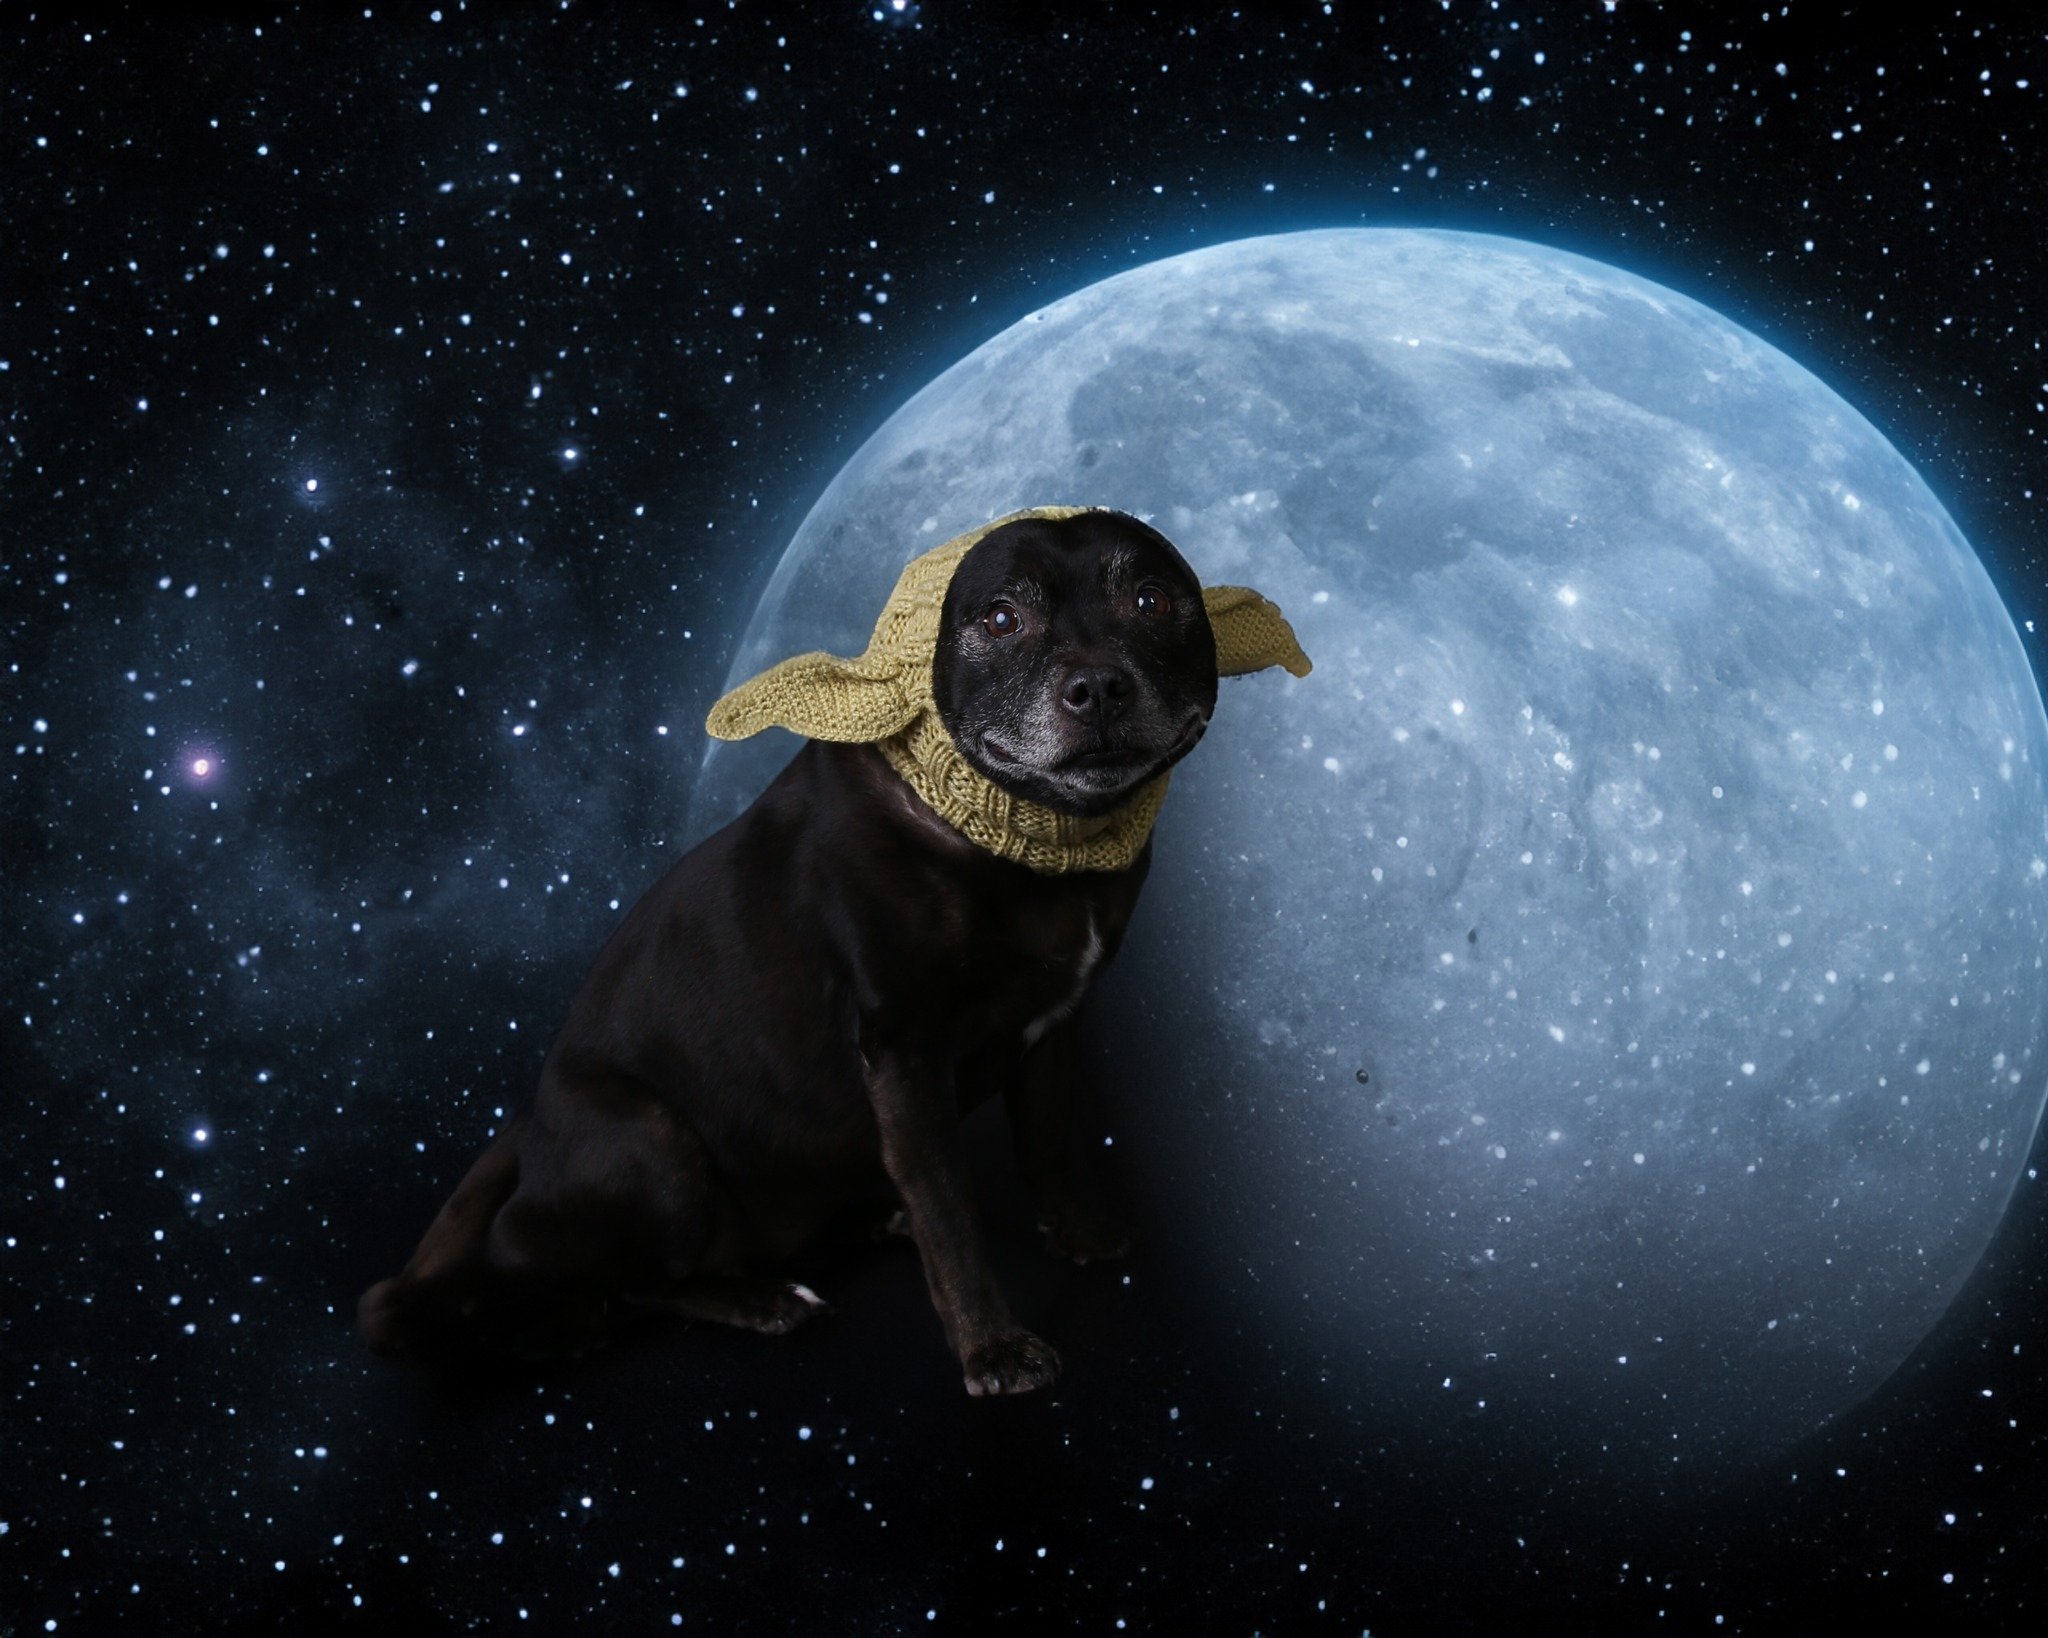 May the 4th be with you!

Celebrating May with Mollie on Zellig's Dog Calendar for Dogs Trust

#Zellig #indigbeth #winkphotography #dogstrust #custardfactory #dogcalendar #strawars #MayThe4thBeWithYou